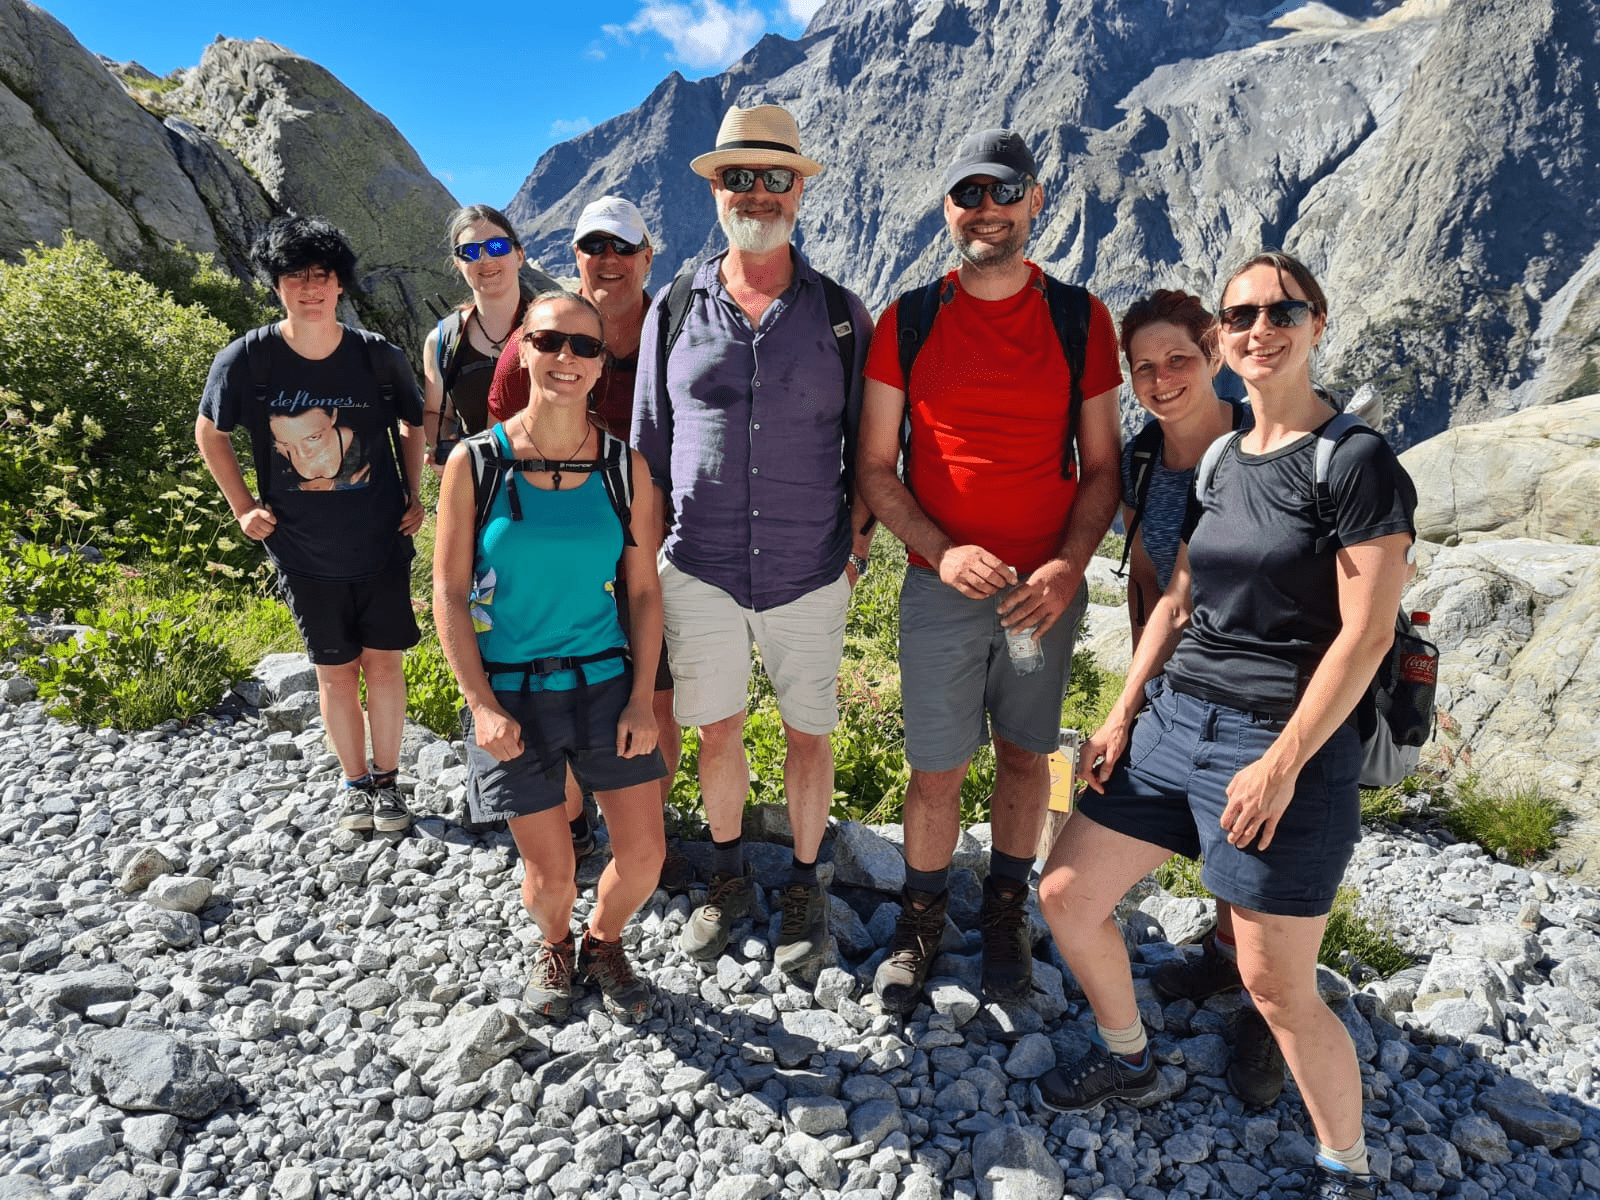 A group of people posing for a photo

Description automatically generated with medium confidence